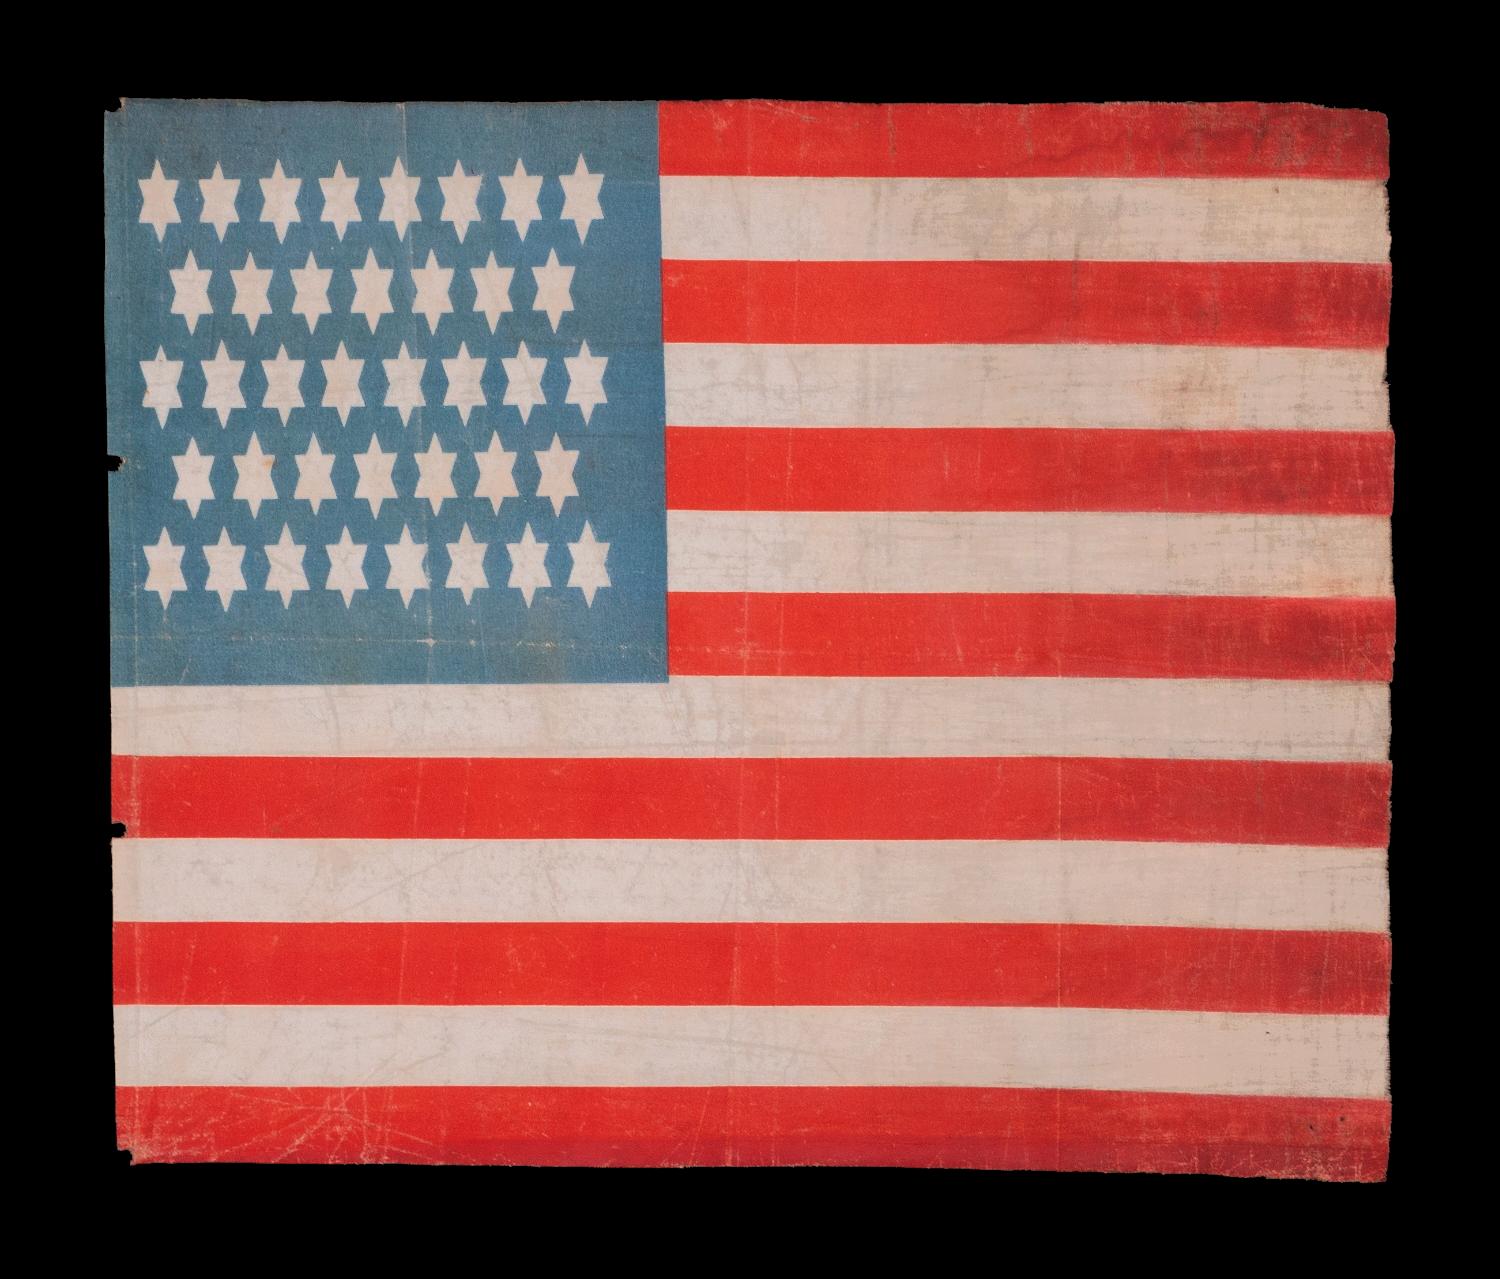 38 WHIMSICAL STARS, WITH 6-POINTED PROFILES, SIMILAR TO THE STAR OF DAVID, ON AN ANTIQUE AMERICAN FLAG OF THE CENTENNIAL ERA; A REMARKABLE SPECIMEN, ONE-OF-A-KIND AMONG KNOWN EXAMPLES, REFLECTS COLORADO STATEHOOD, 1876-1889 

This remarkable 38 star